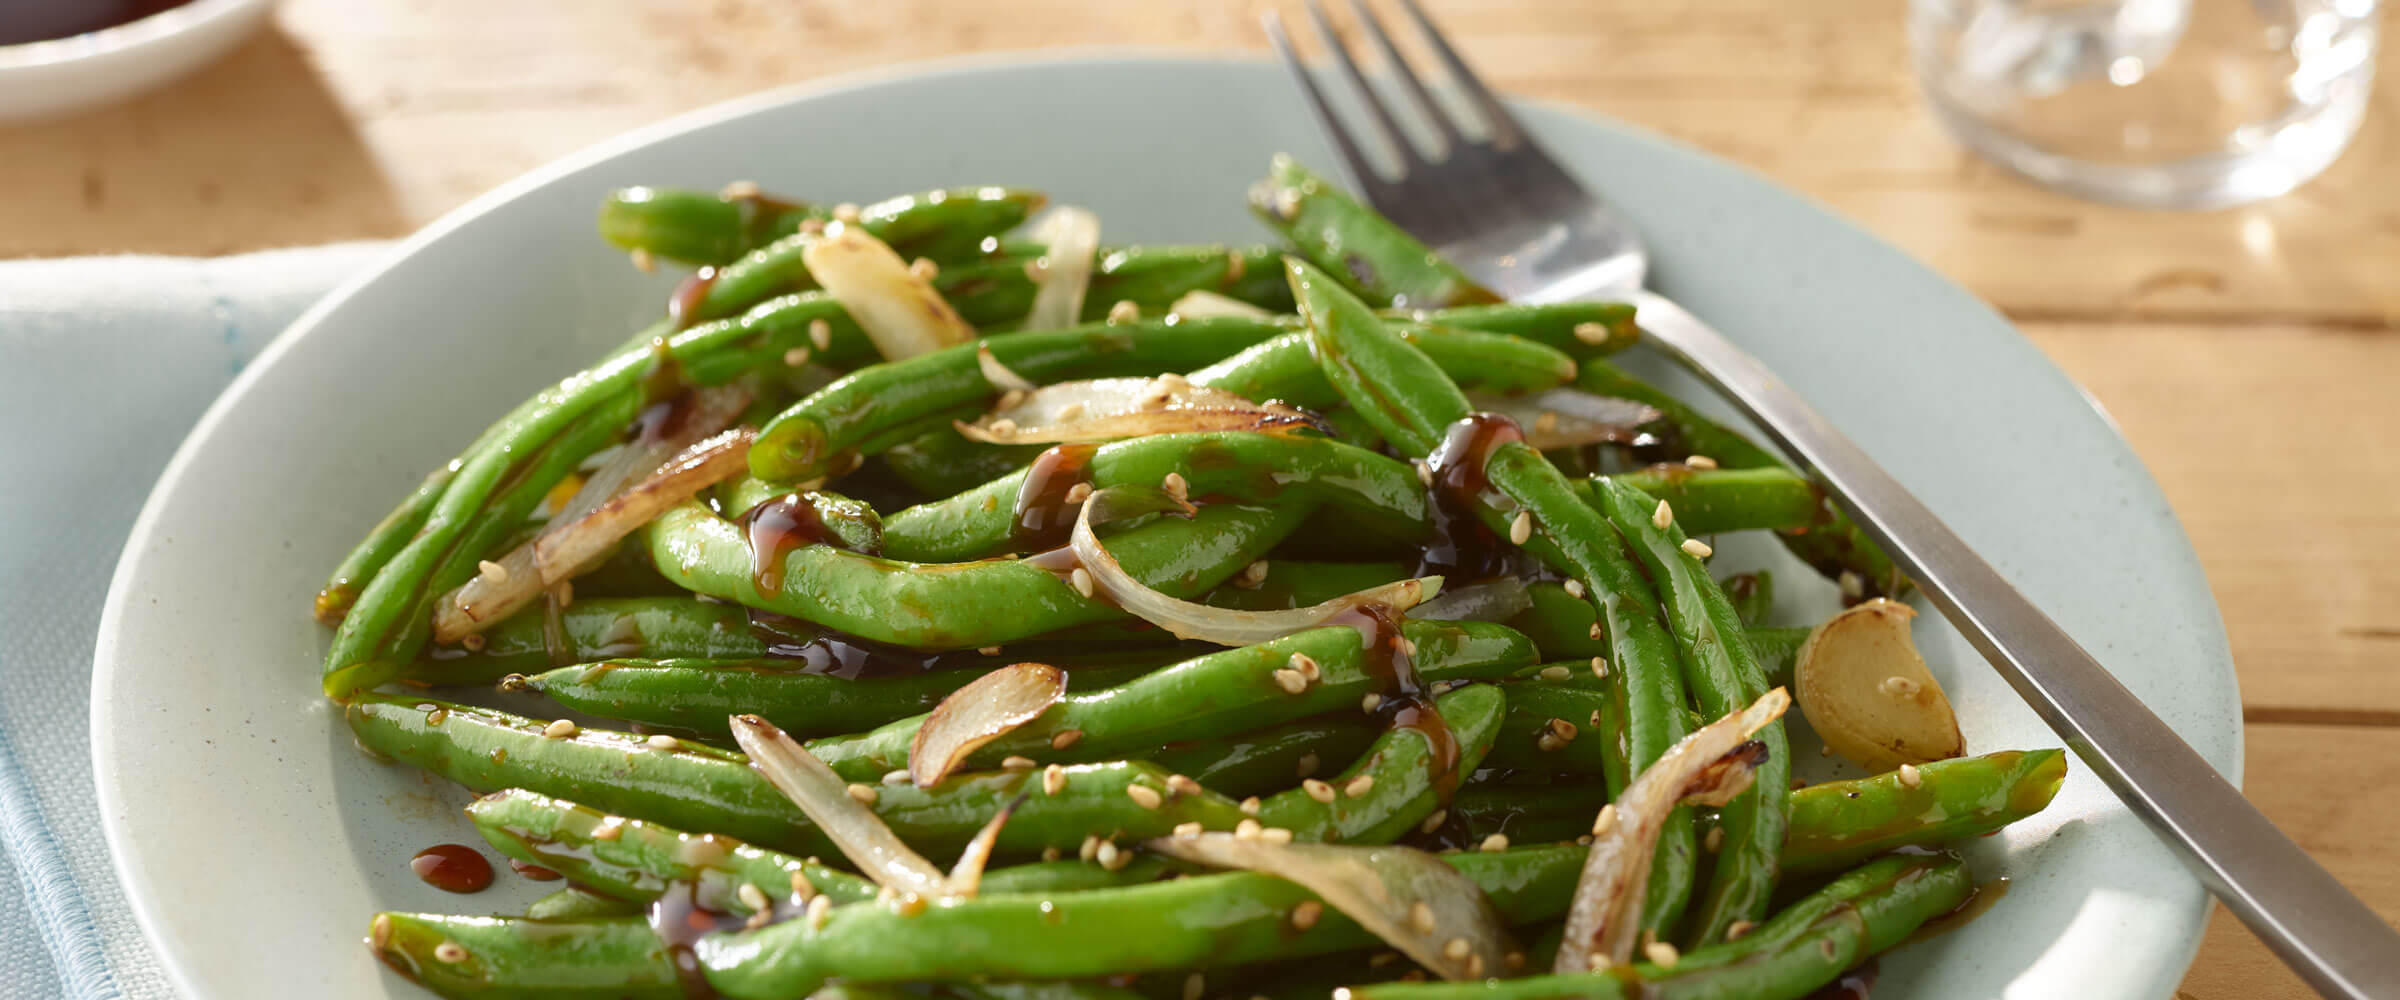 Asian Green Beans with sesame seeds in bowl with fork